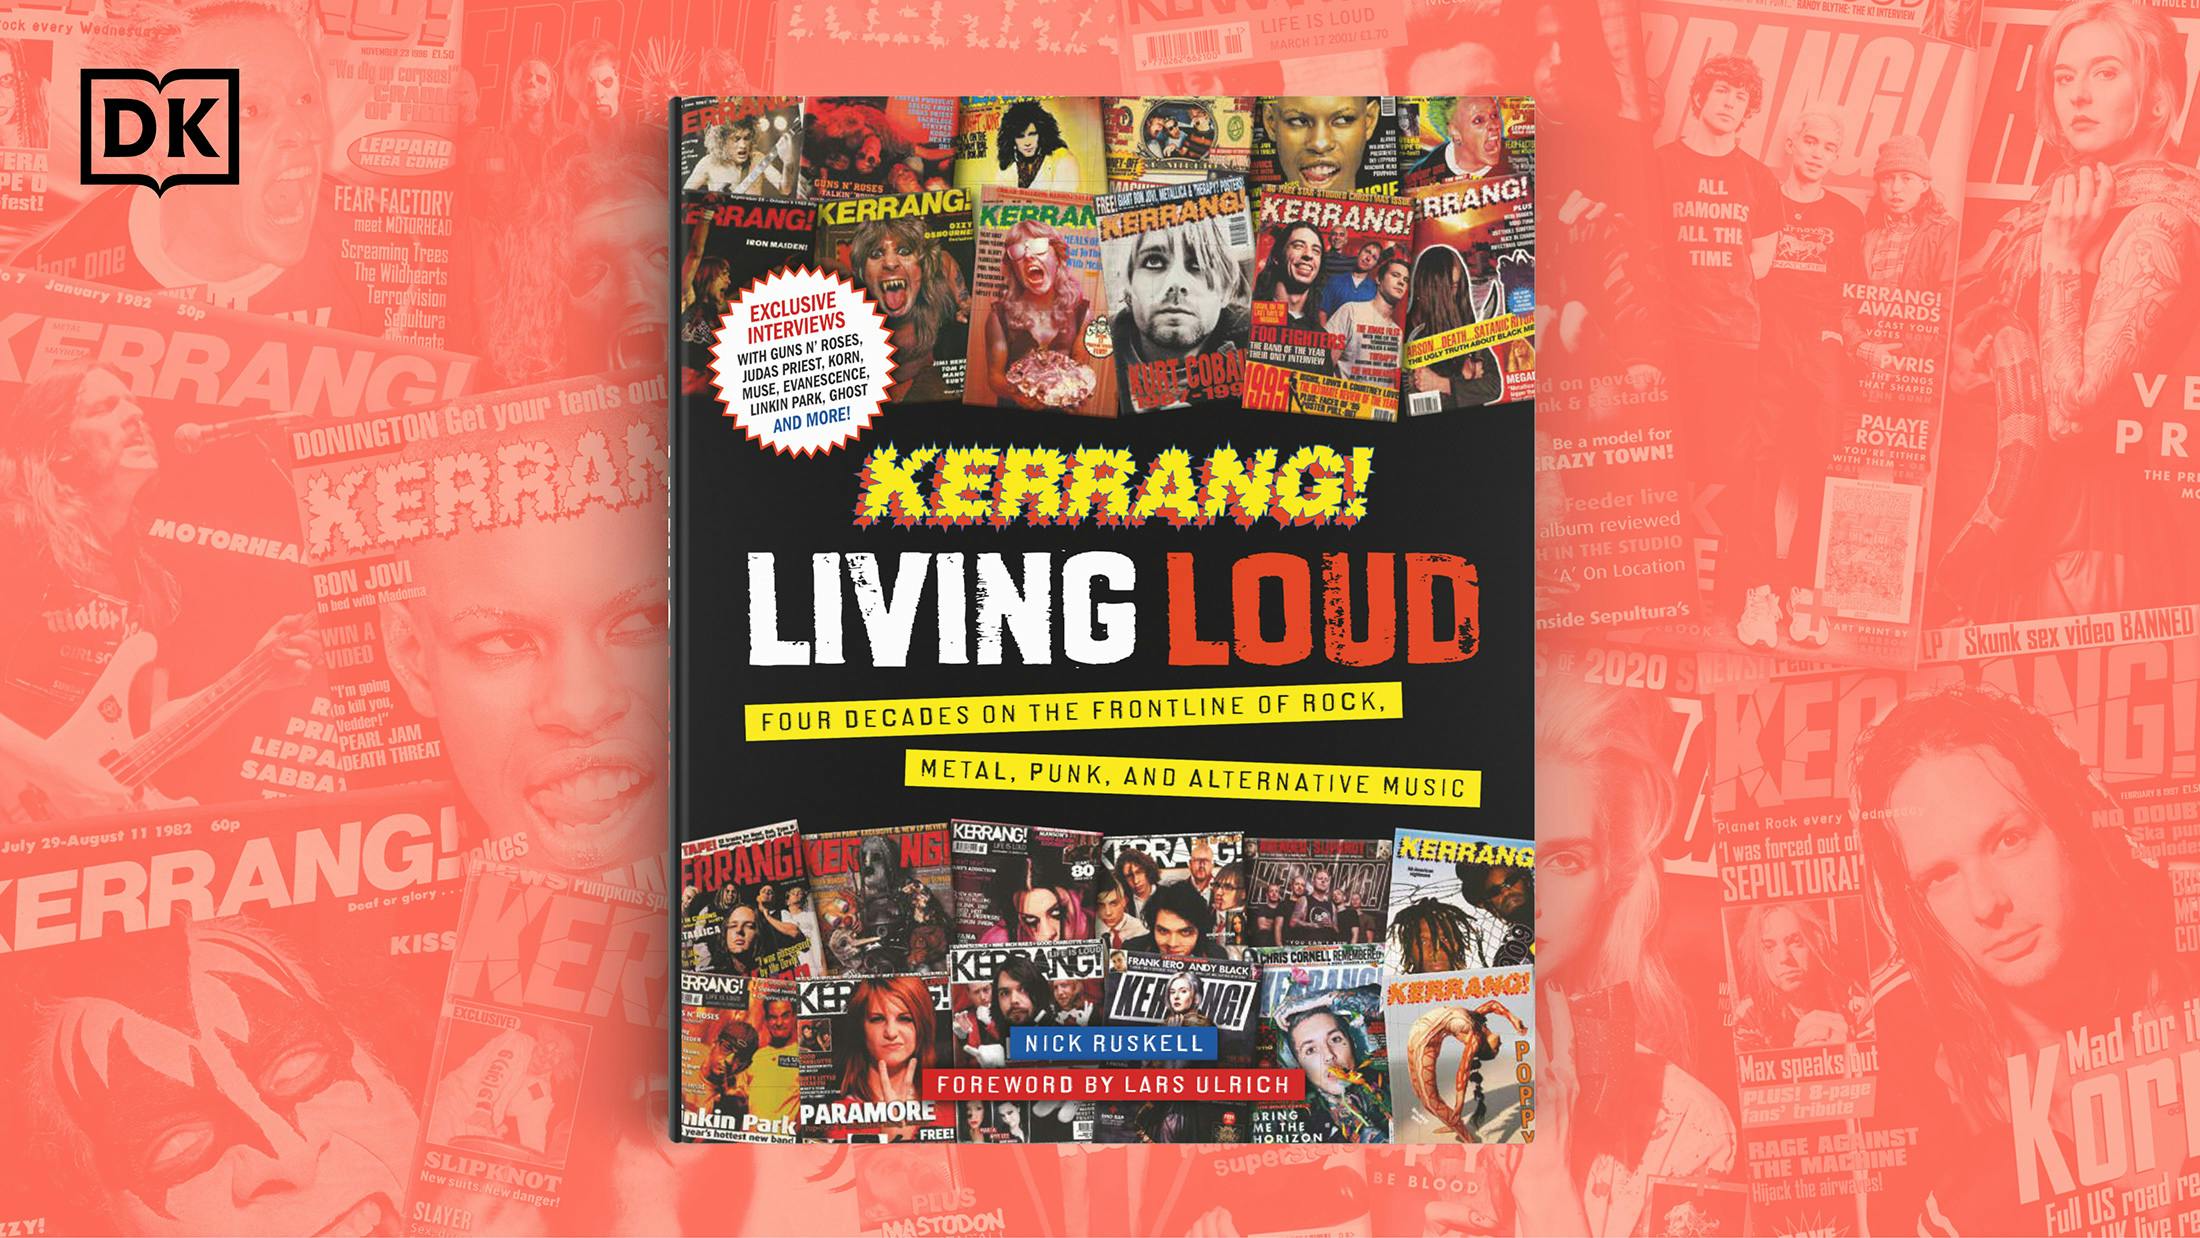 Kerrang! to release new book Living Loud: Four Decades On The Frontline Of Rock, Metal, Punk, And Alternative Music